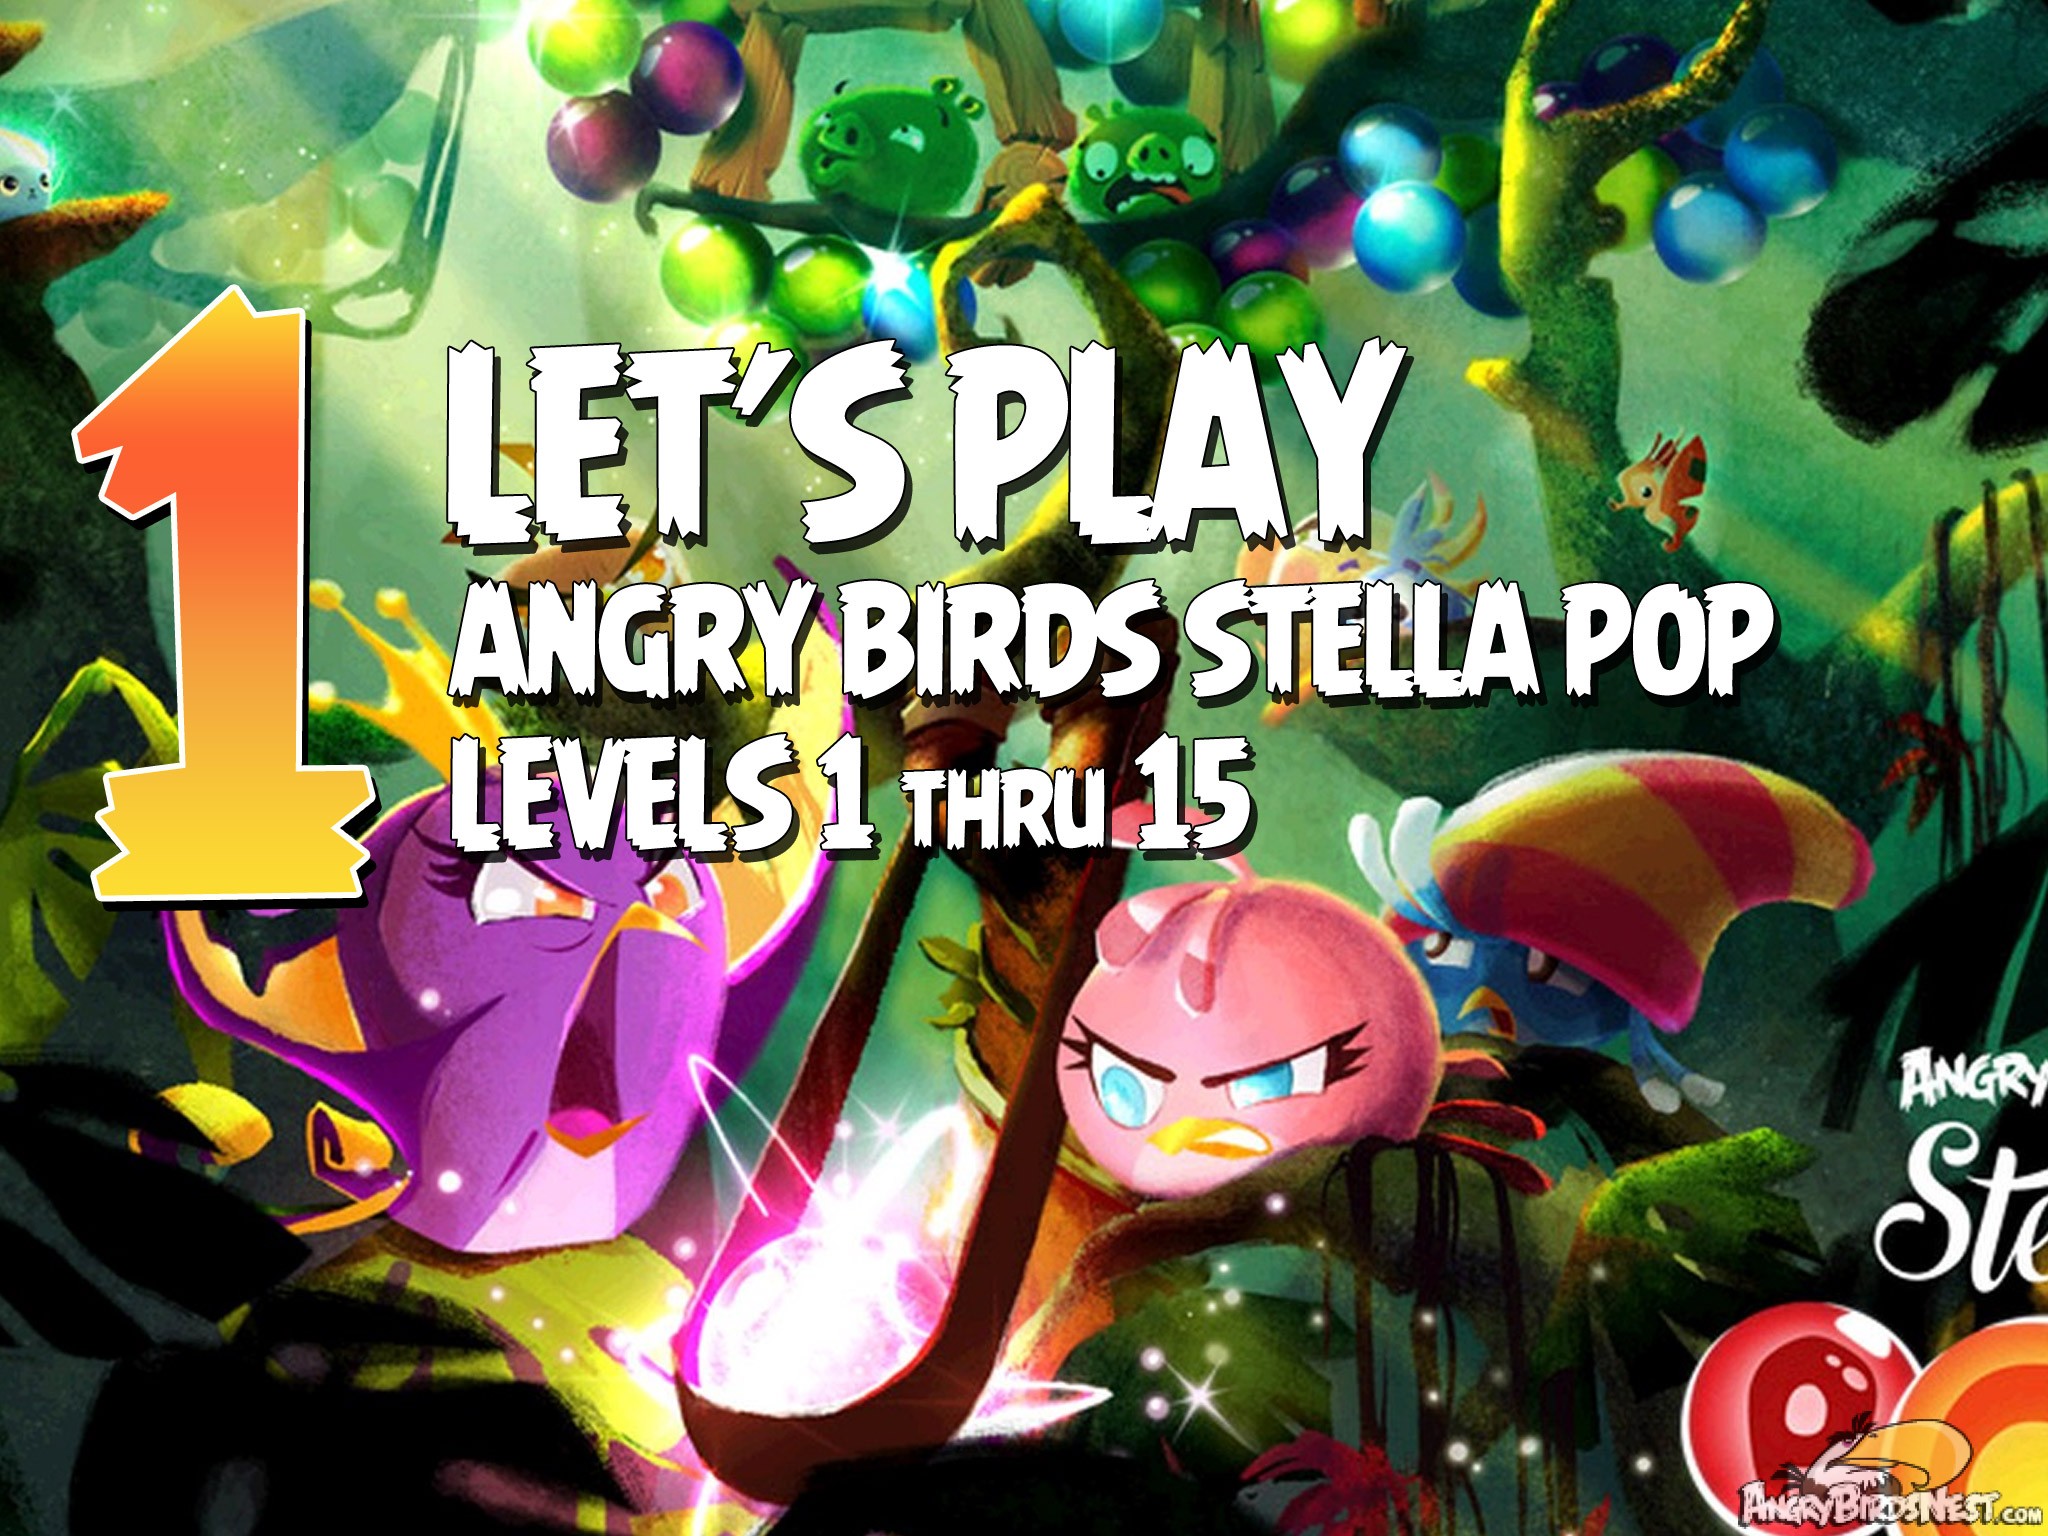 Angry Birds Stella Pop Featured Image Levels 1 thru 15